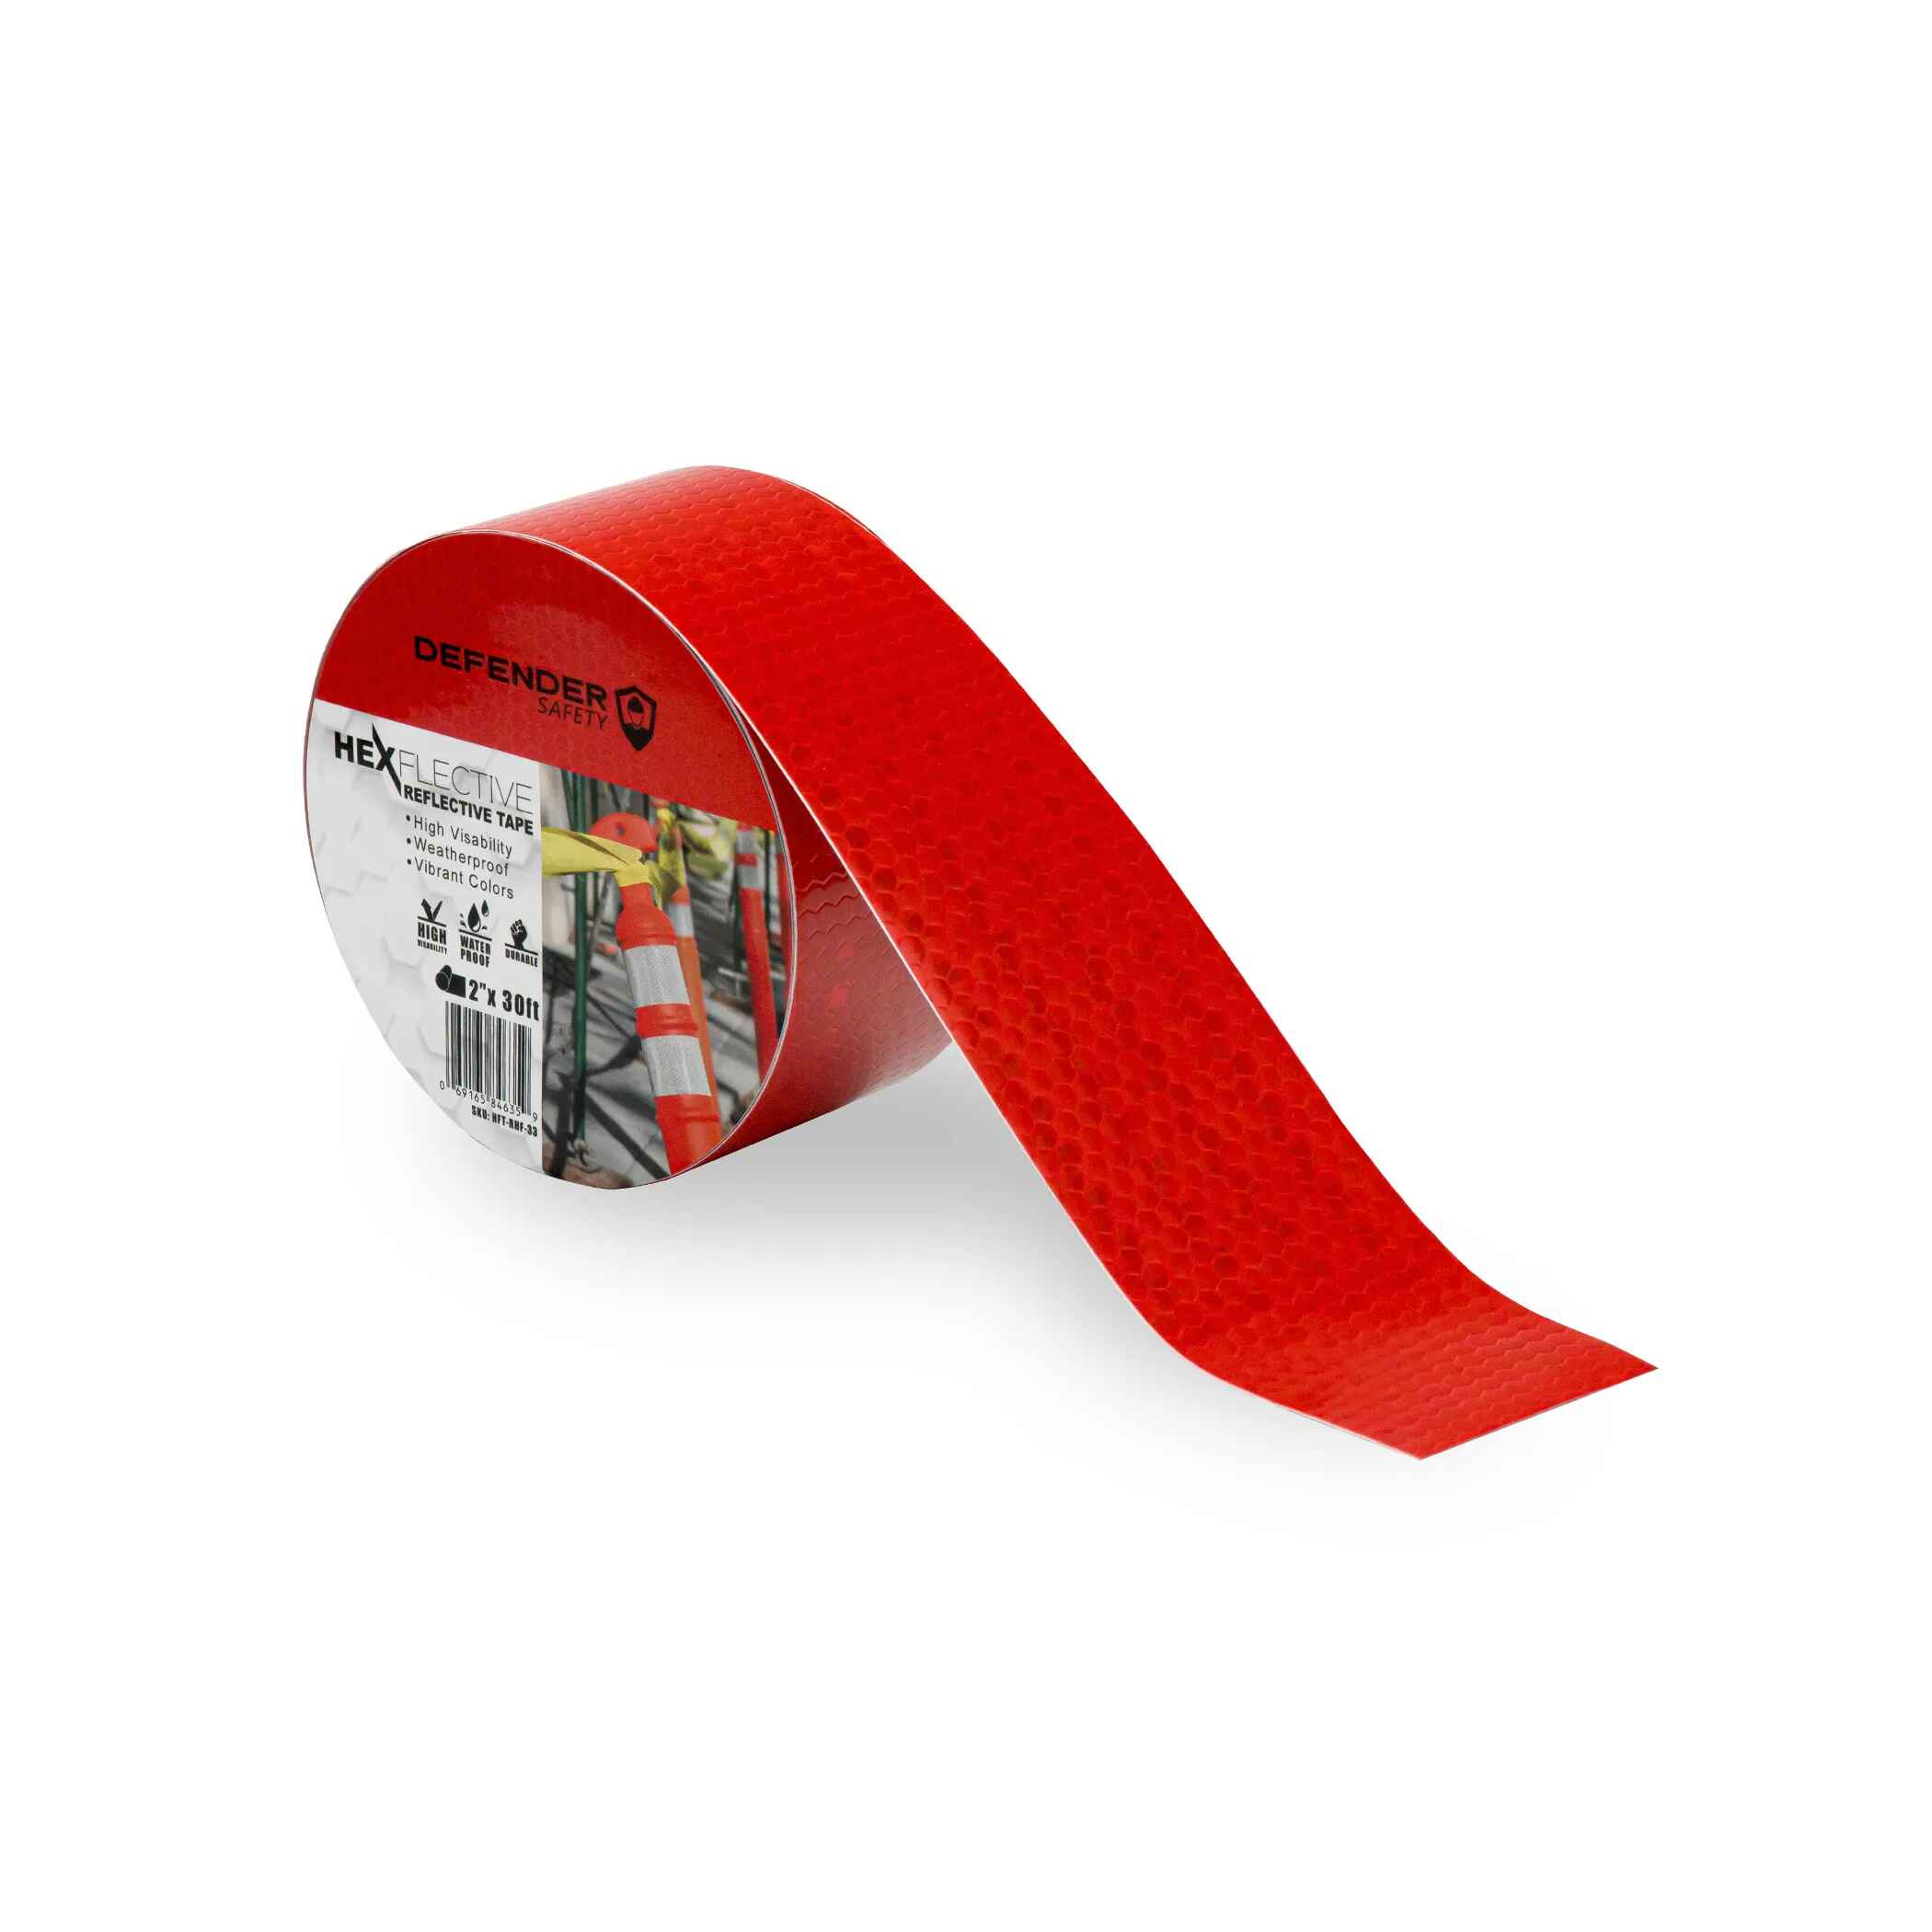 HEXFLECTIVE™ Reflective Tape. 2"x 30'. Red Honeycomb Pattern - Defender Safety